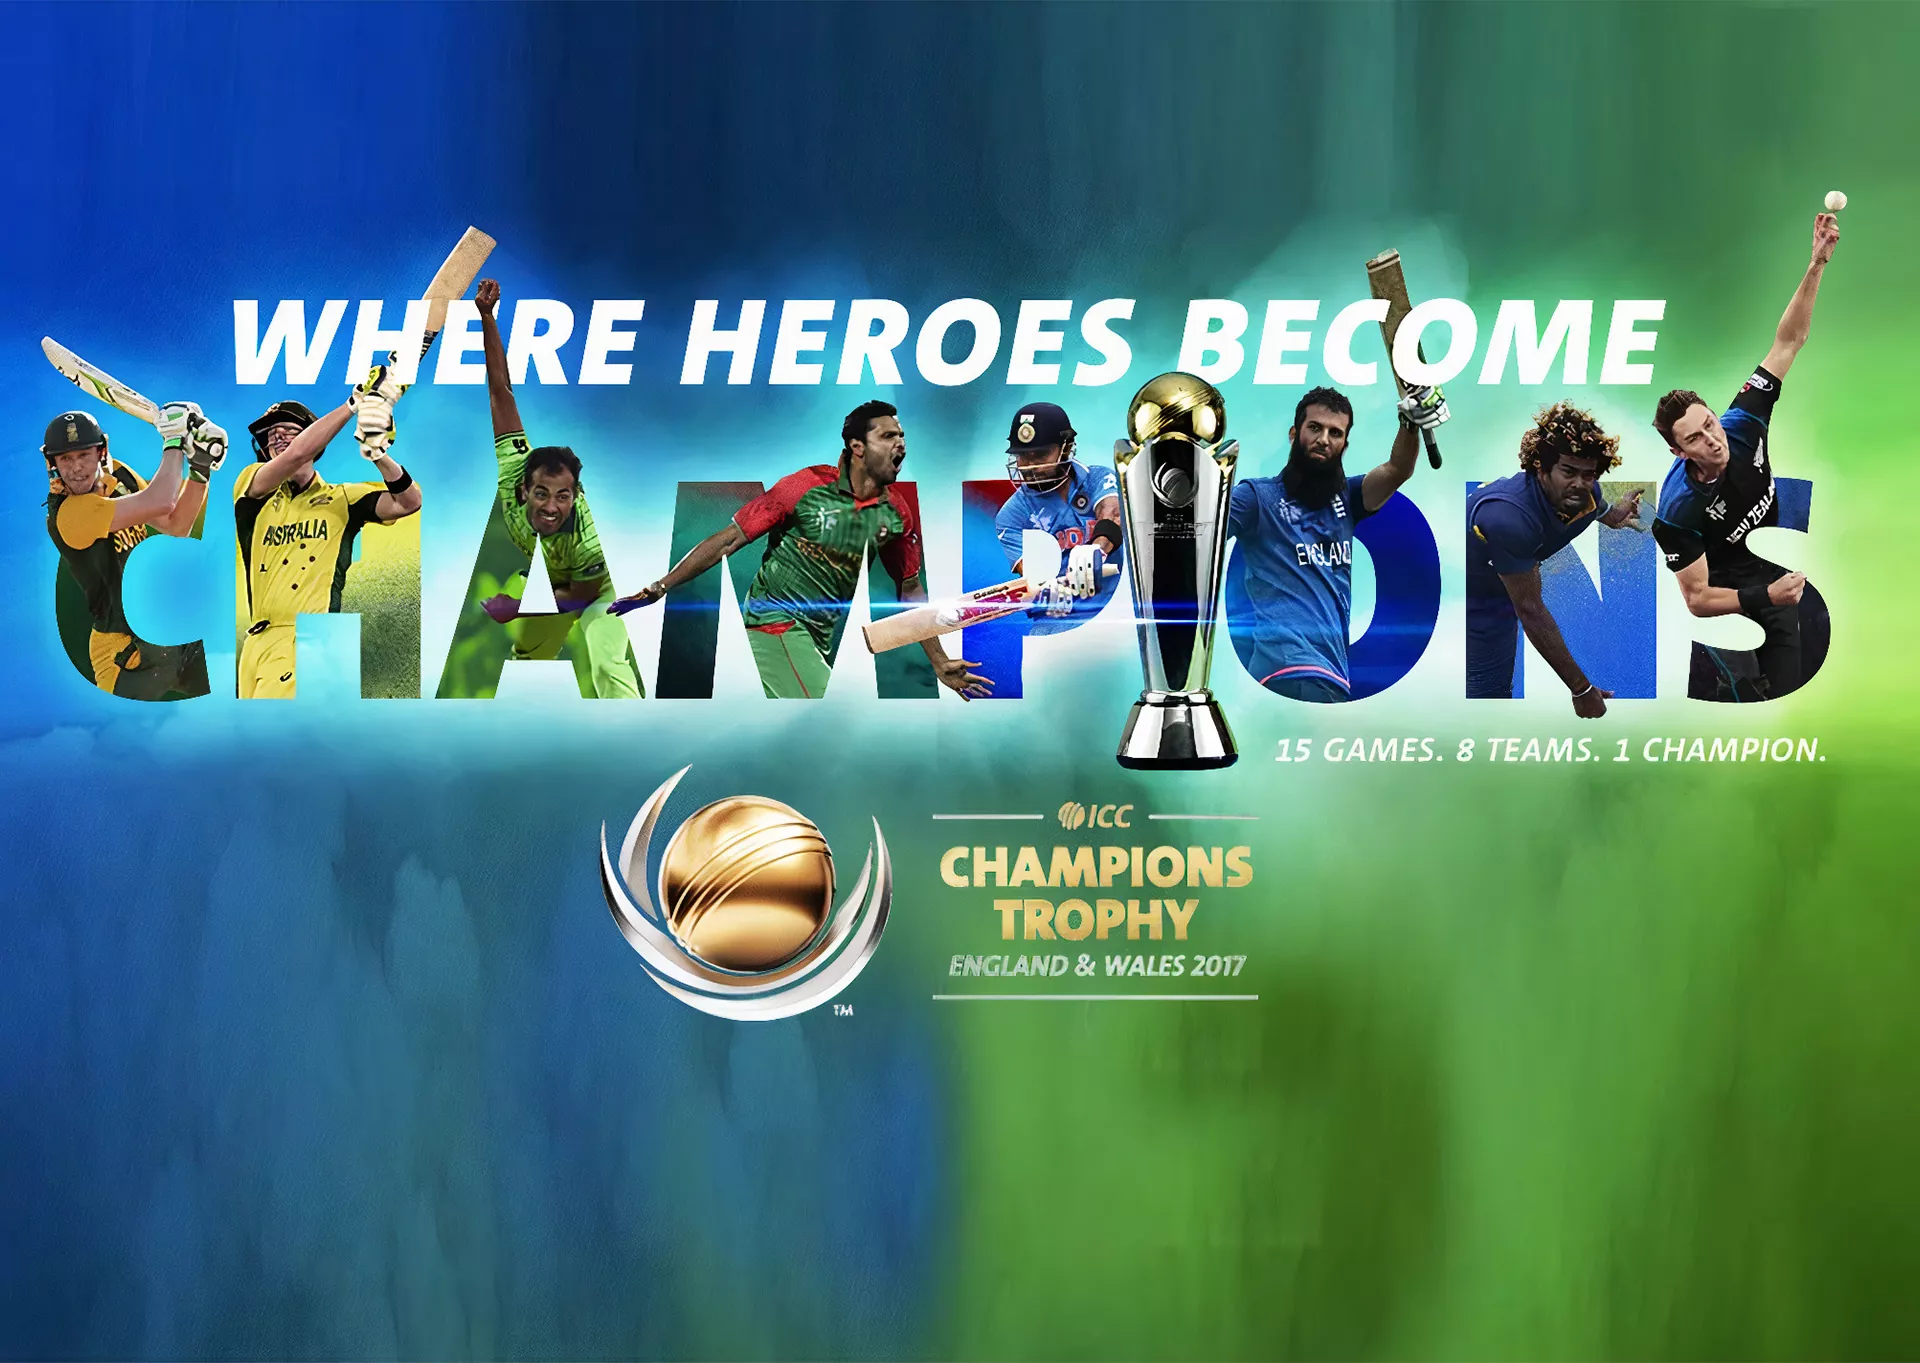 You can place bets on ICC Champions Trophy after registering on the site